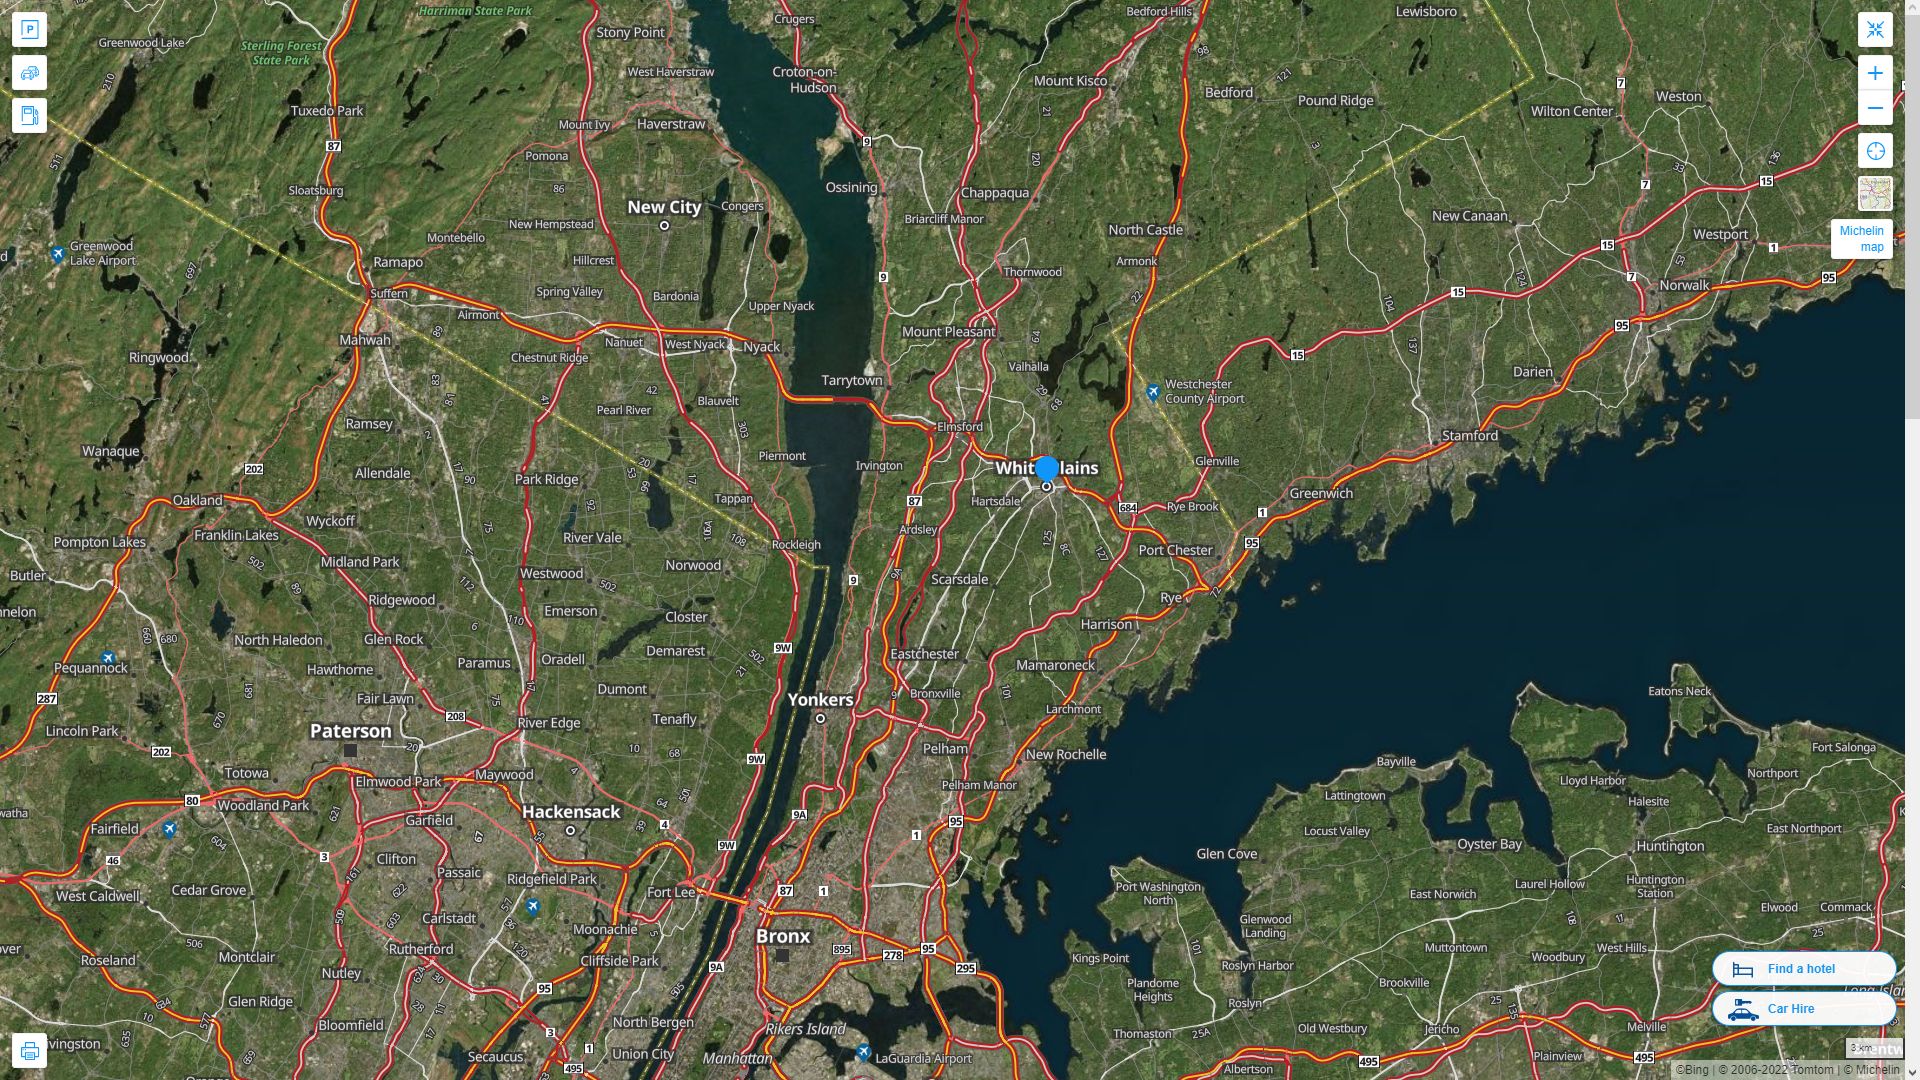 White Plains New York Highway and Road Map with Satellite View